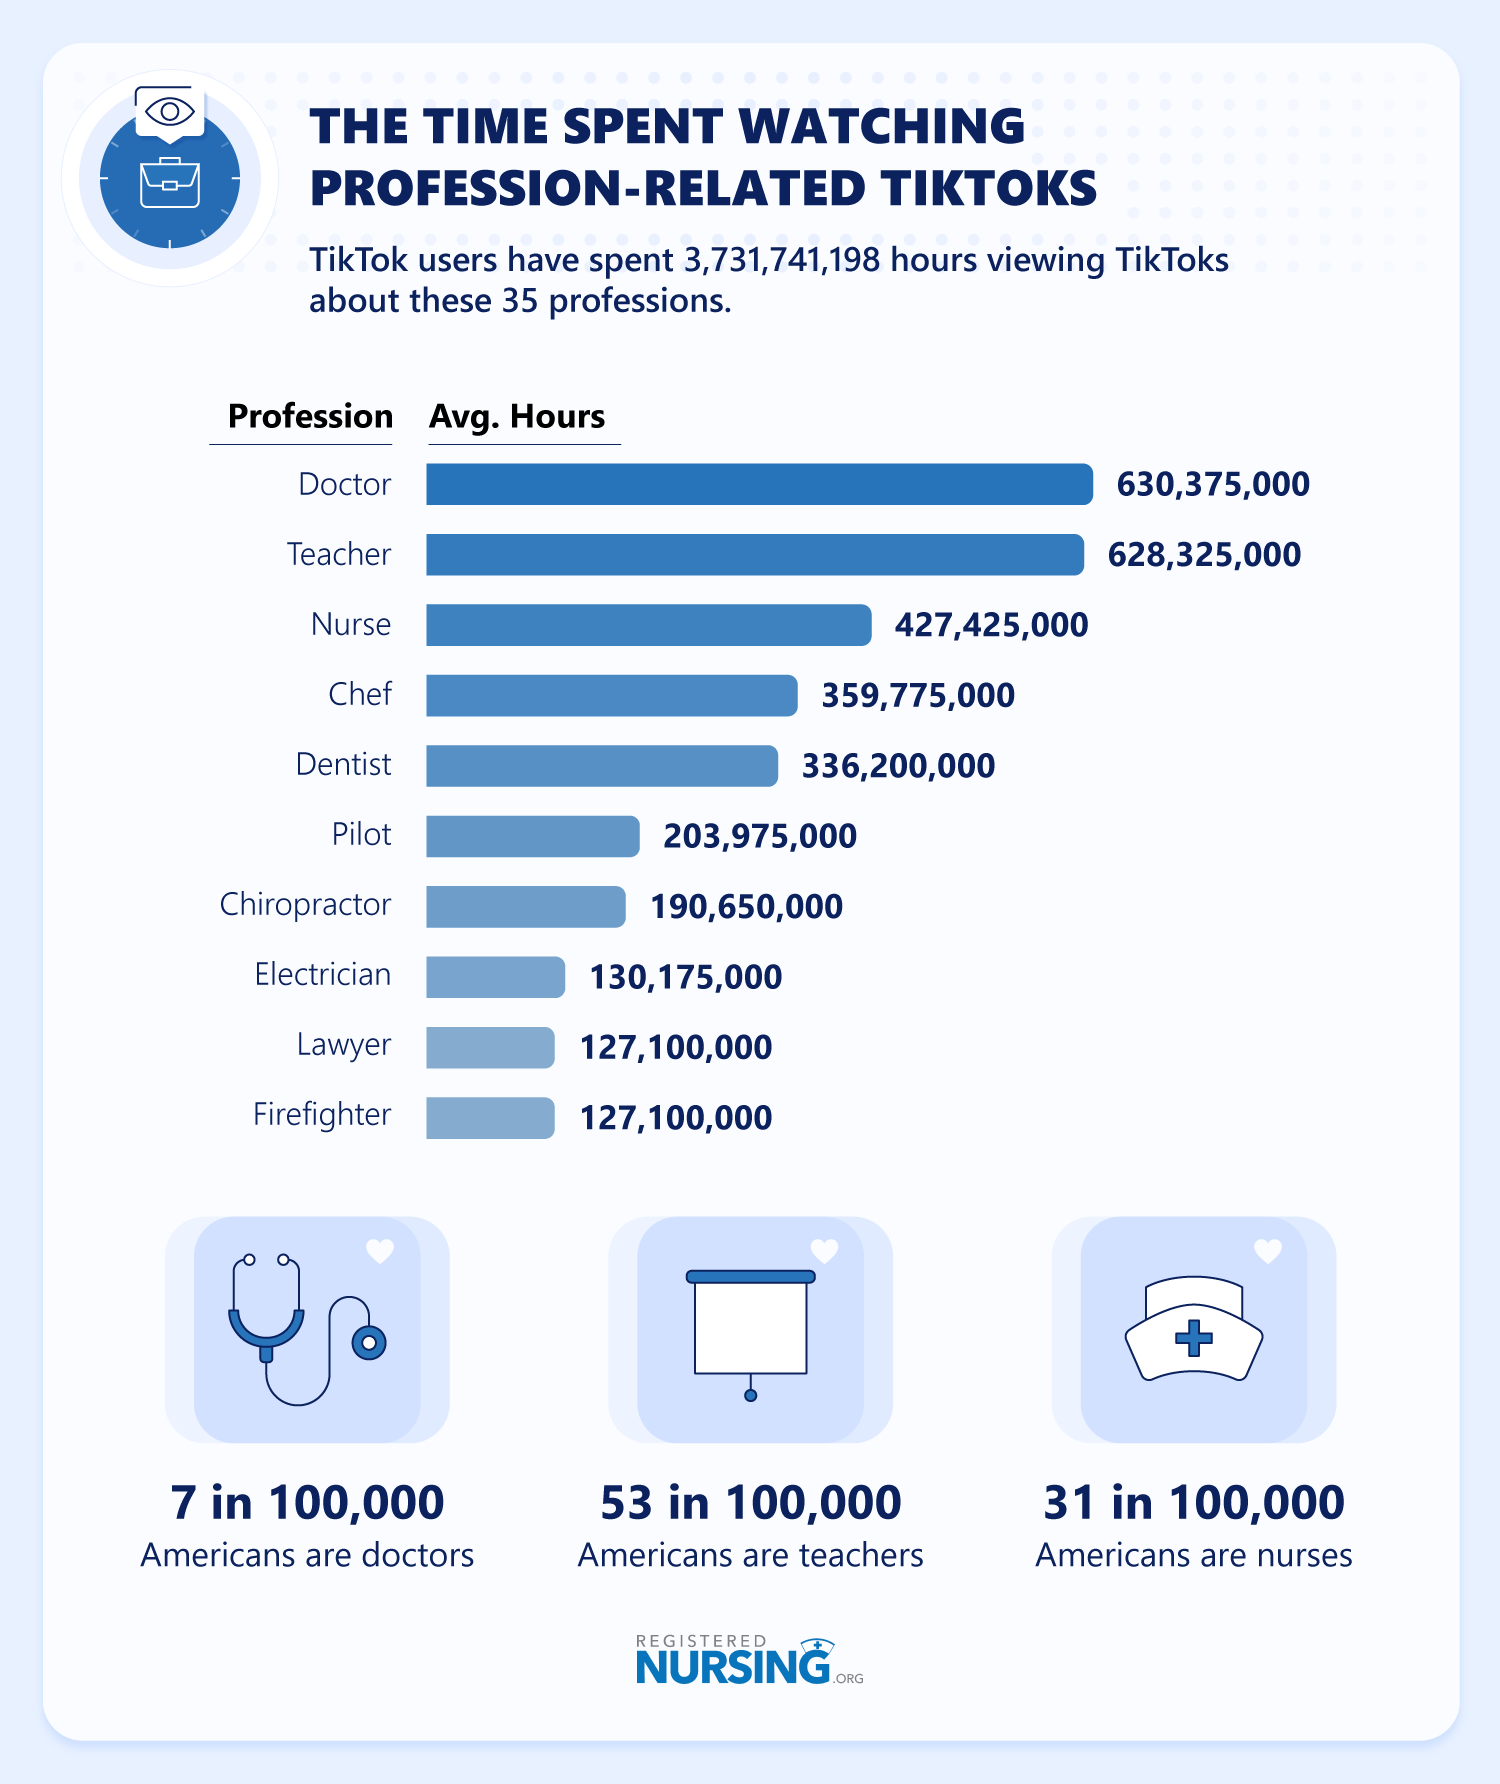 The time spent watching profession related TikToks. Nursing had over 427 million hours worth of views. 